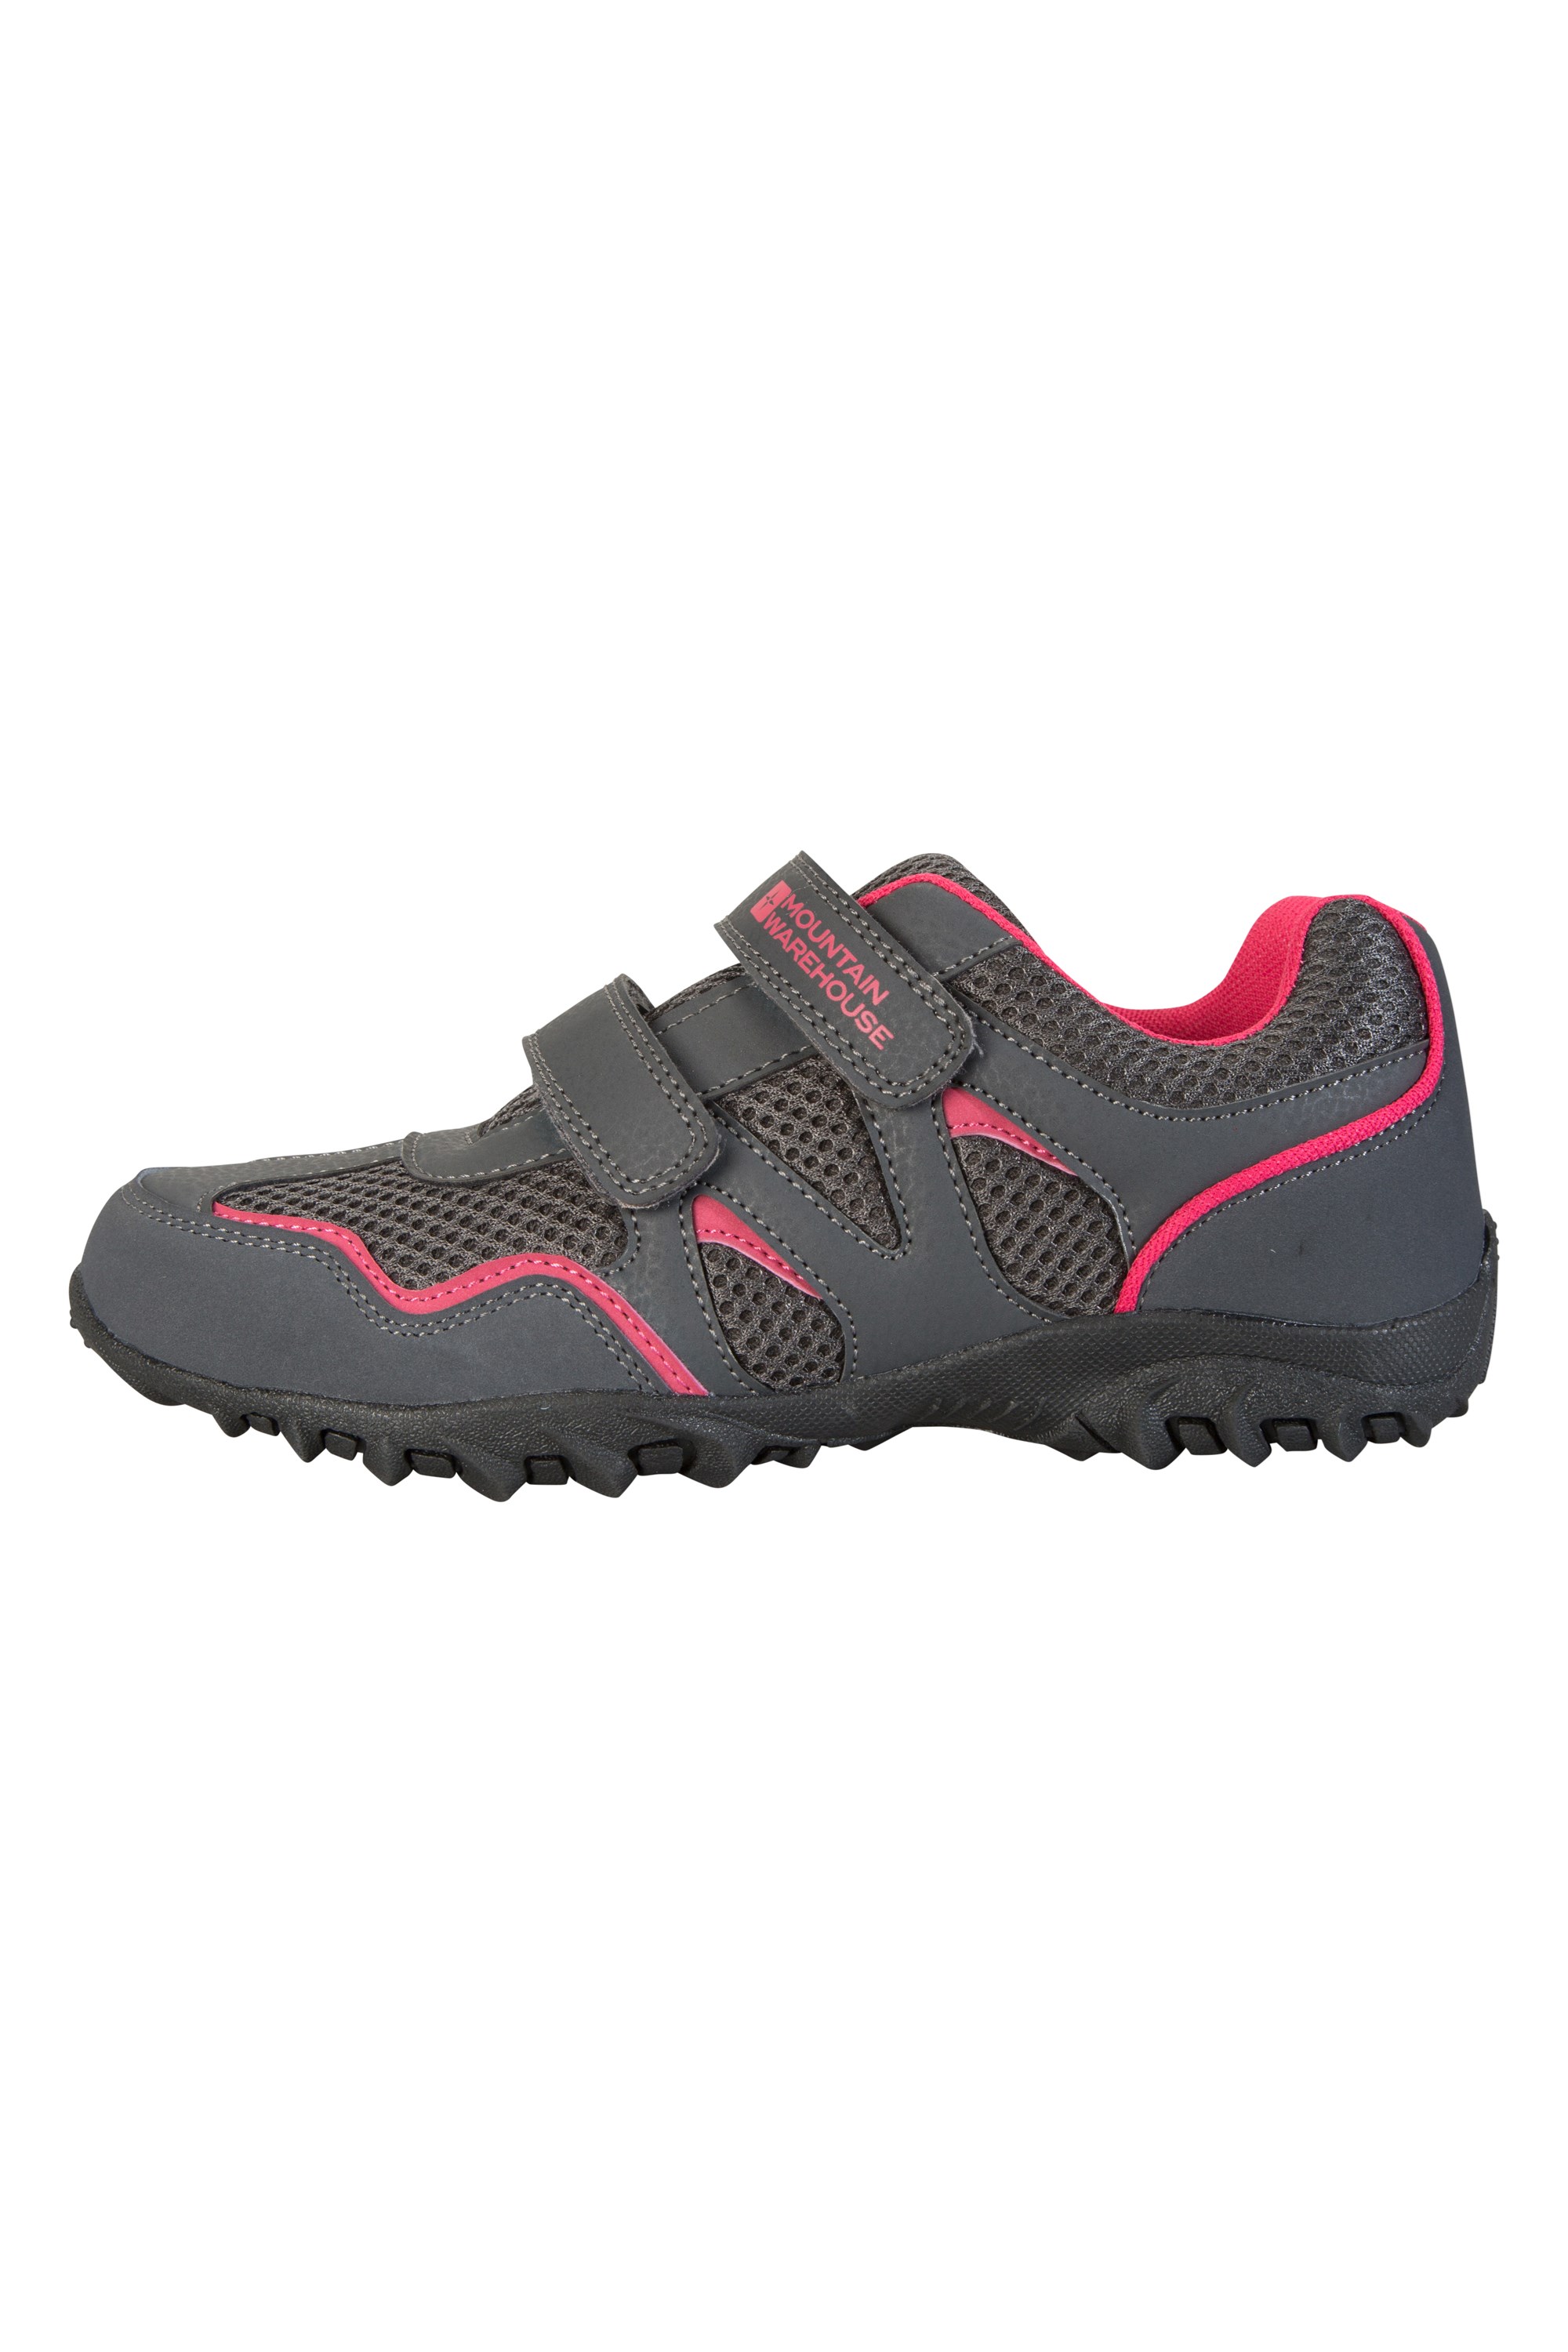 Mountain Warehouse Mountain Warehouse Girls Black Neptune Kids Hook and Loop Shoes Trainers US 6 